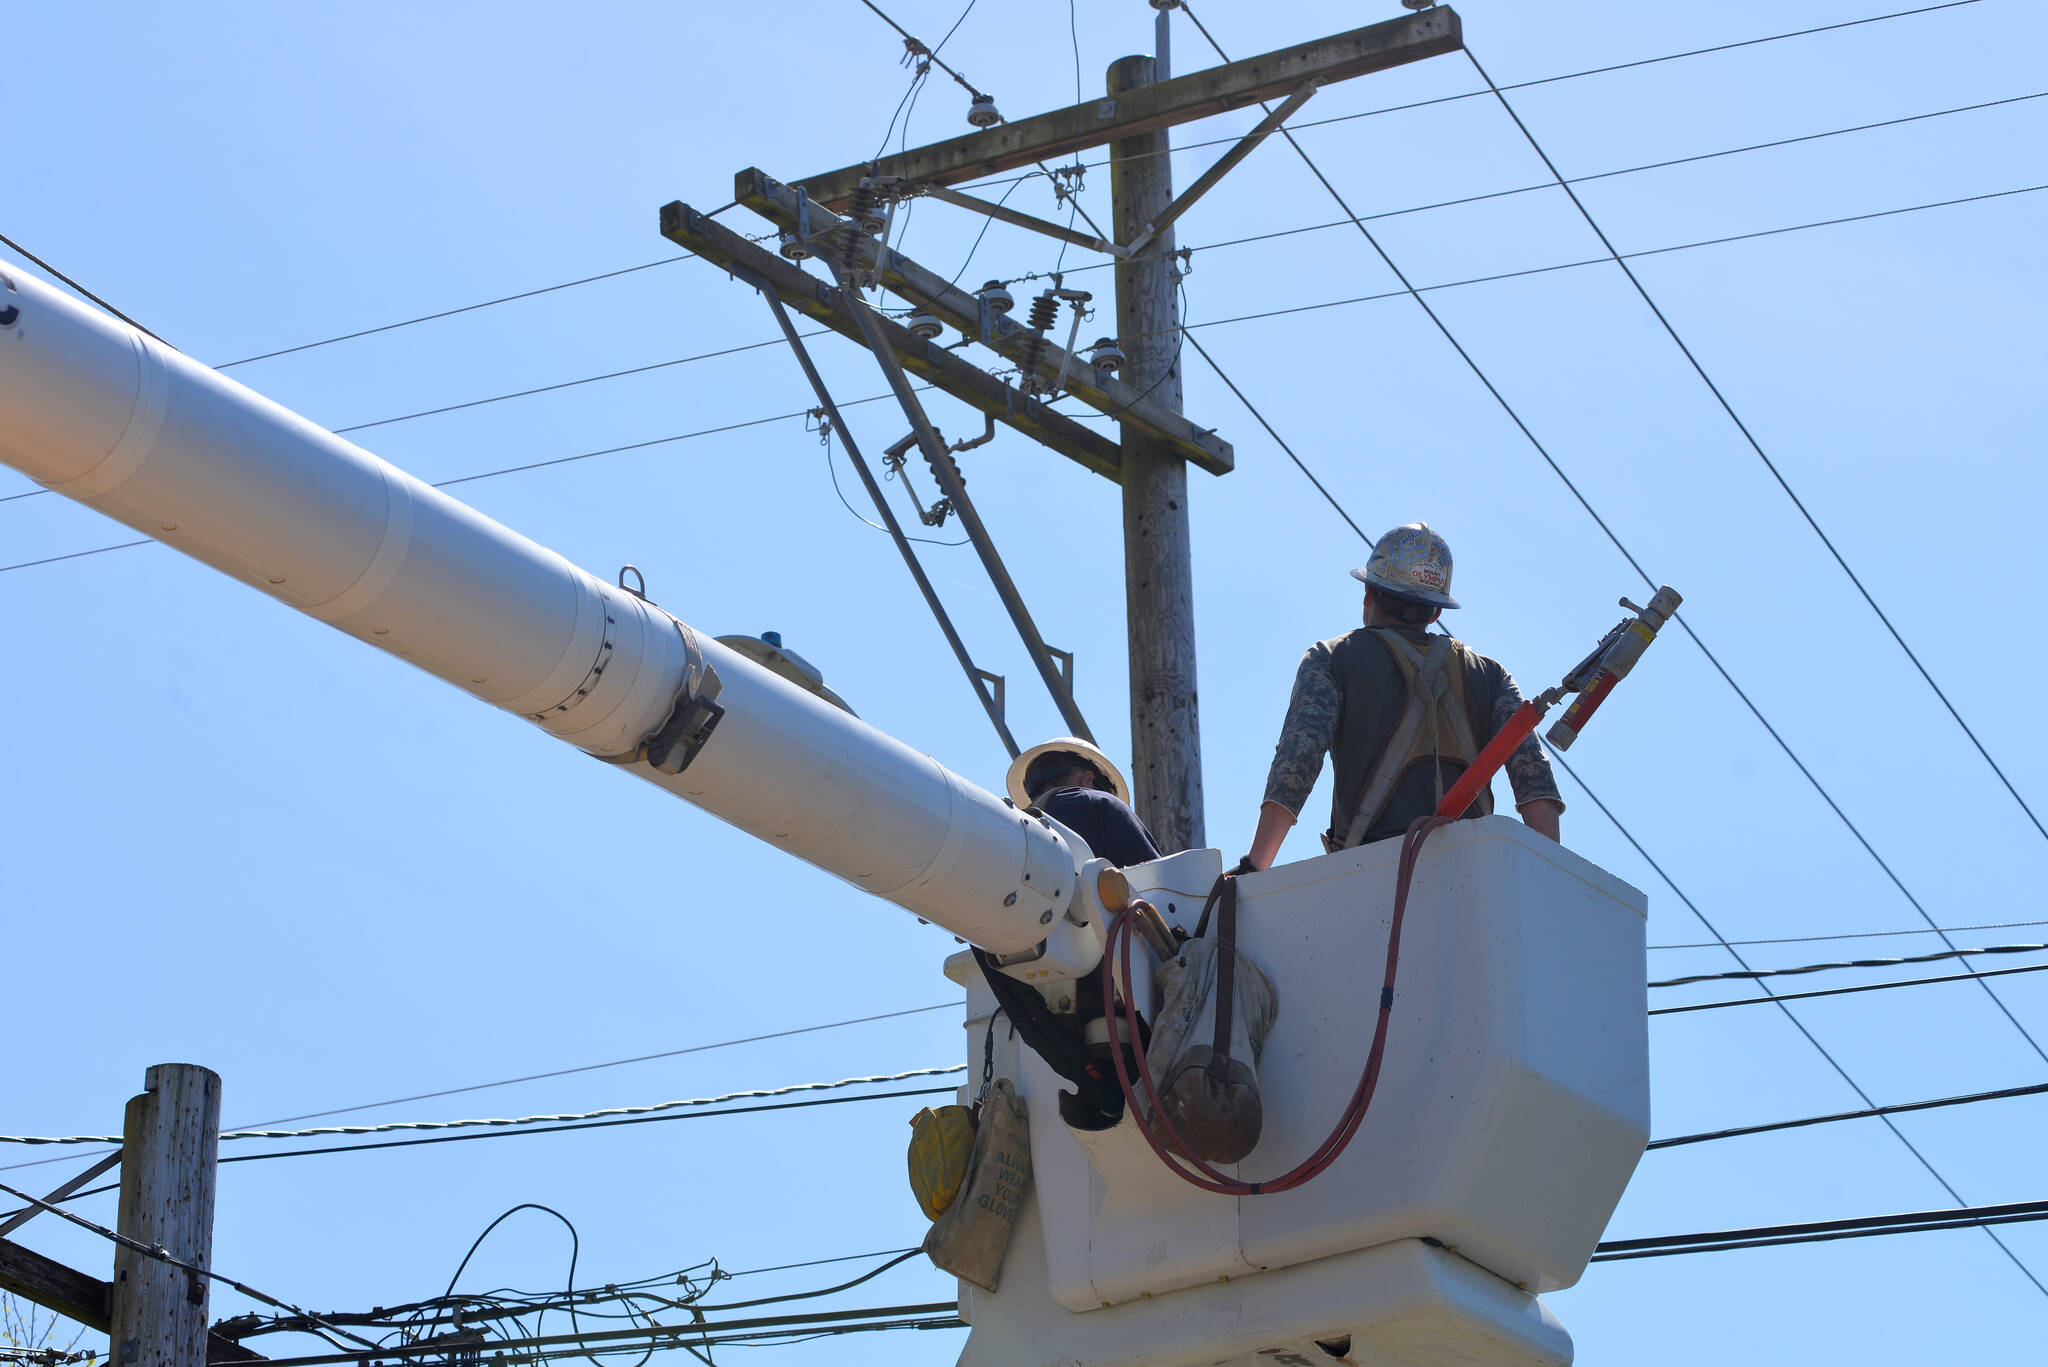 pud-handles-outages-caused-by-windy-conditions-the-daily-world